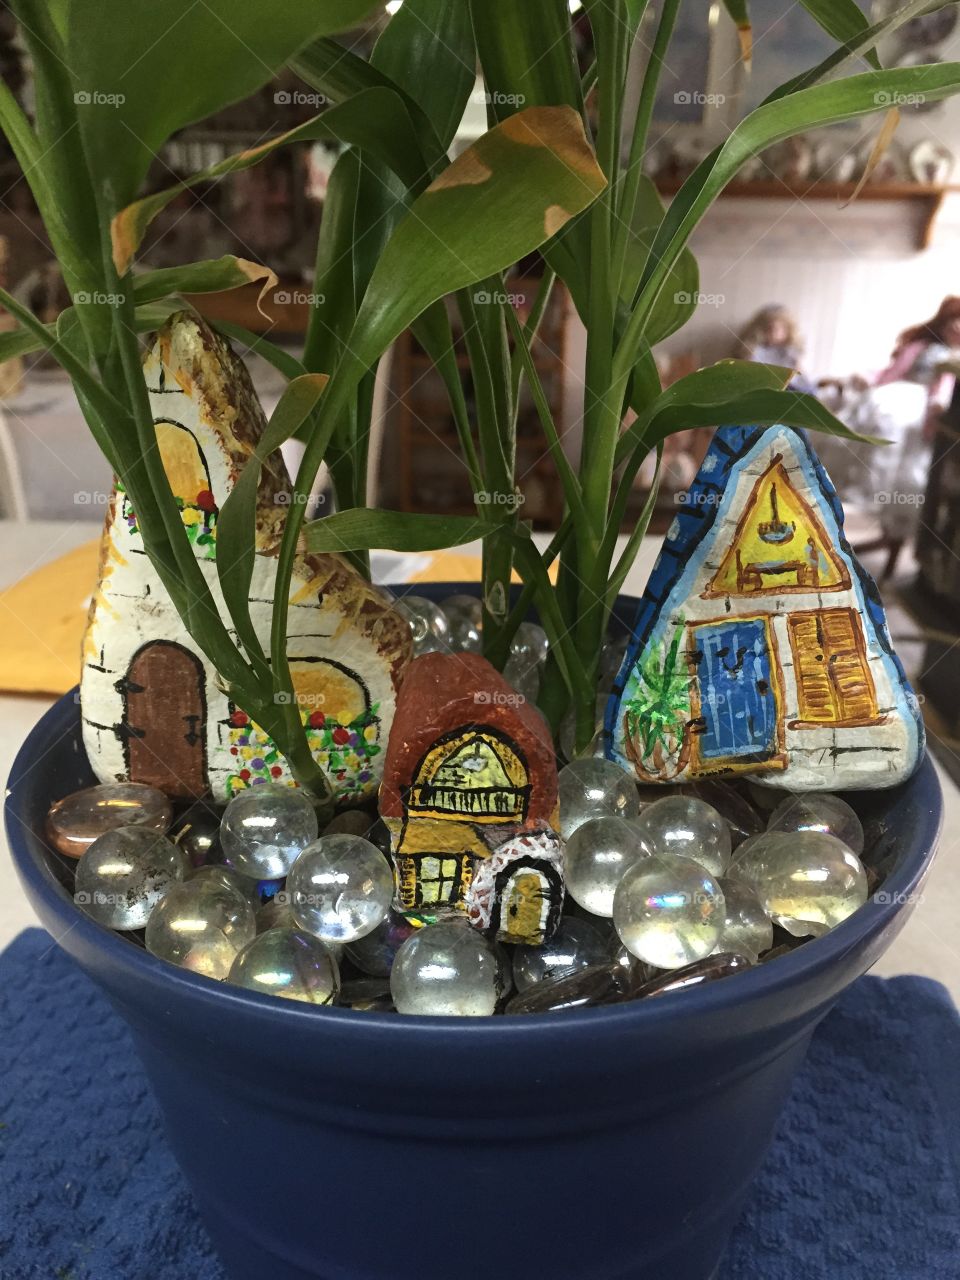 Fairy cottages. Painted stone cottages sharing a plants pot. 